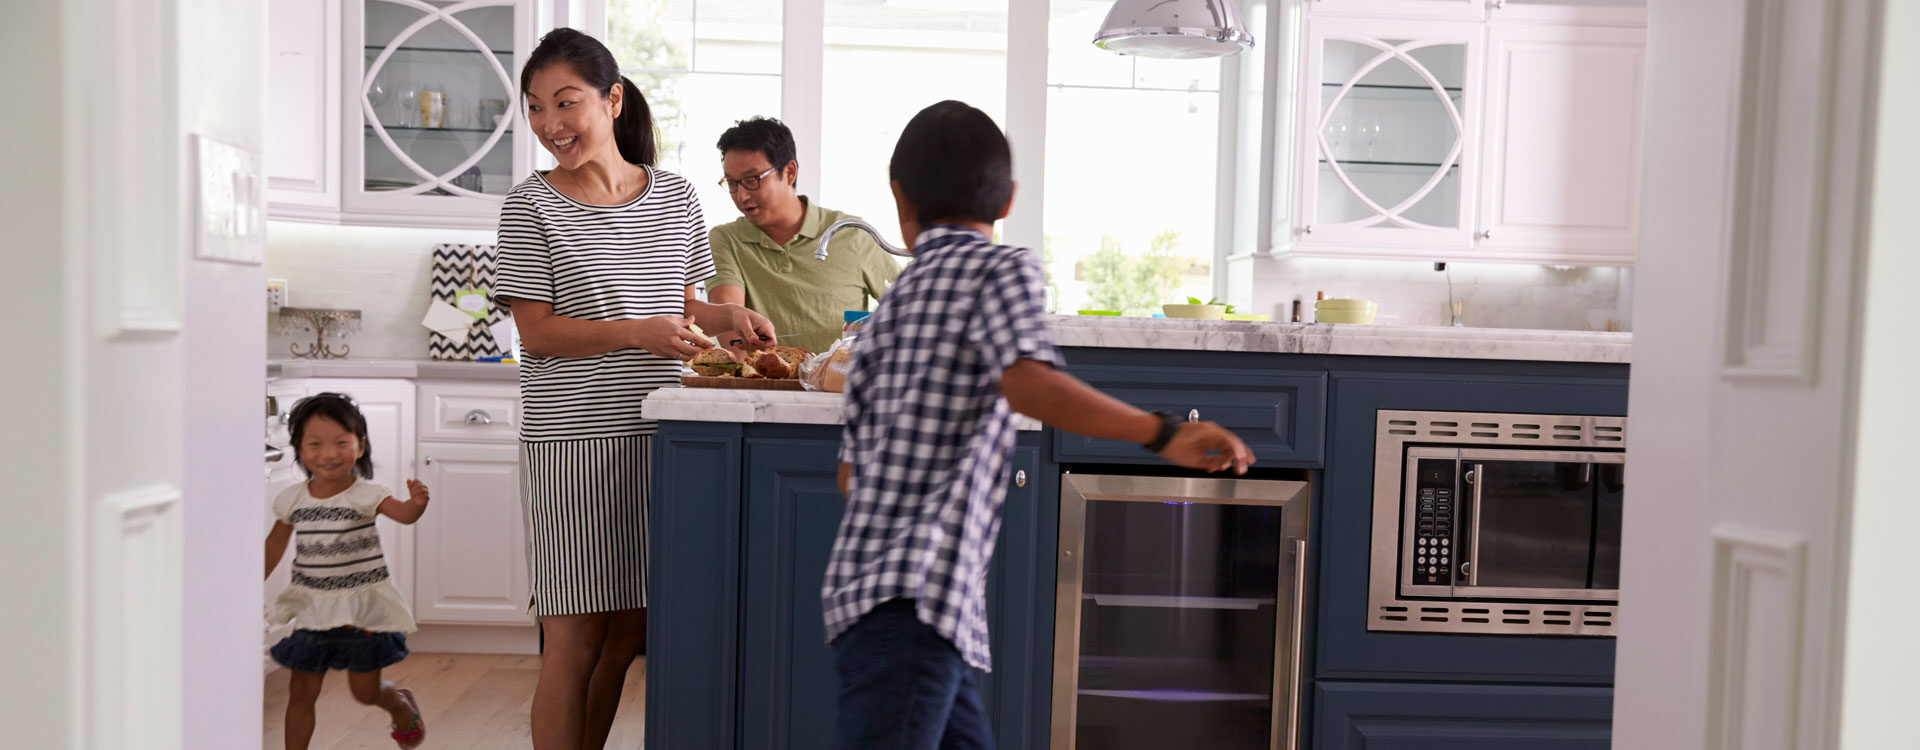 Family gathered in kitchen in comfortable home